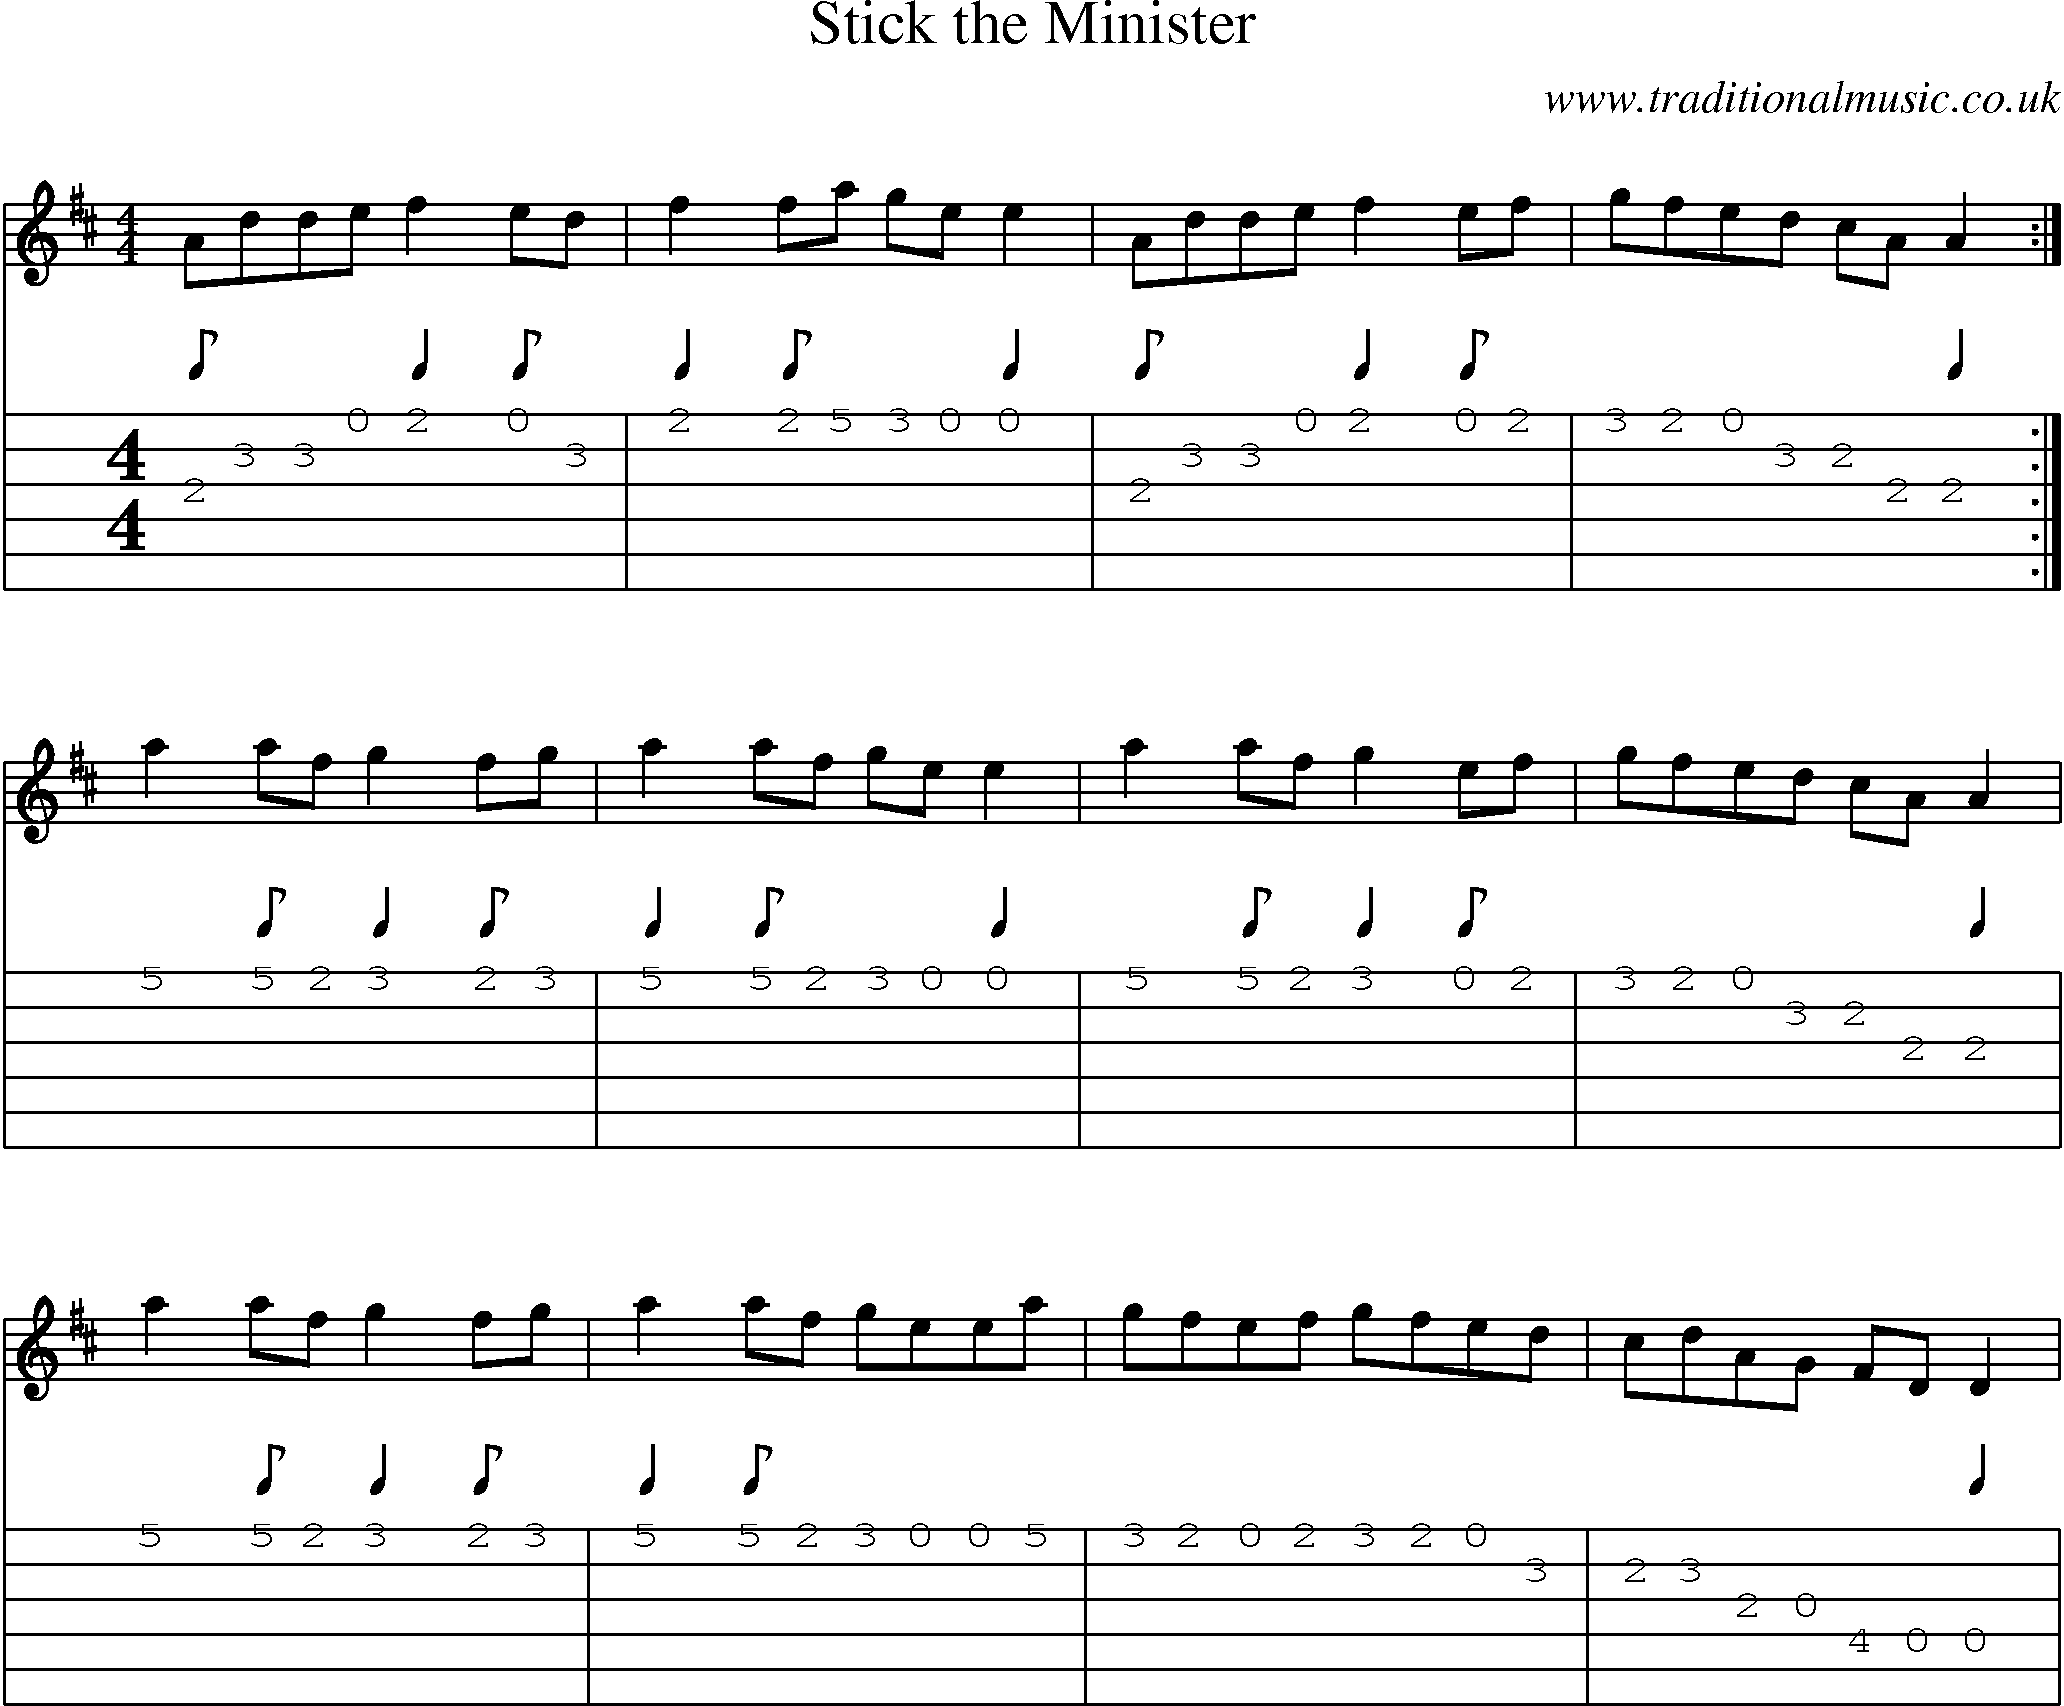 Music Score and Guitar Tabs for Stick Minister